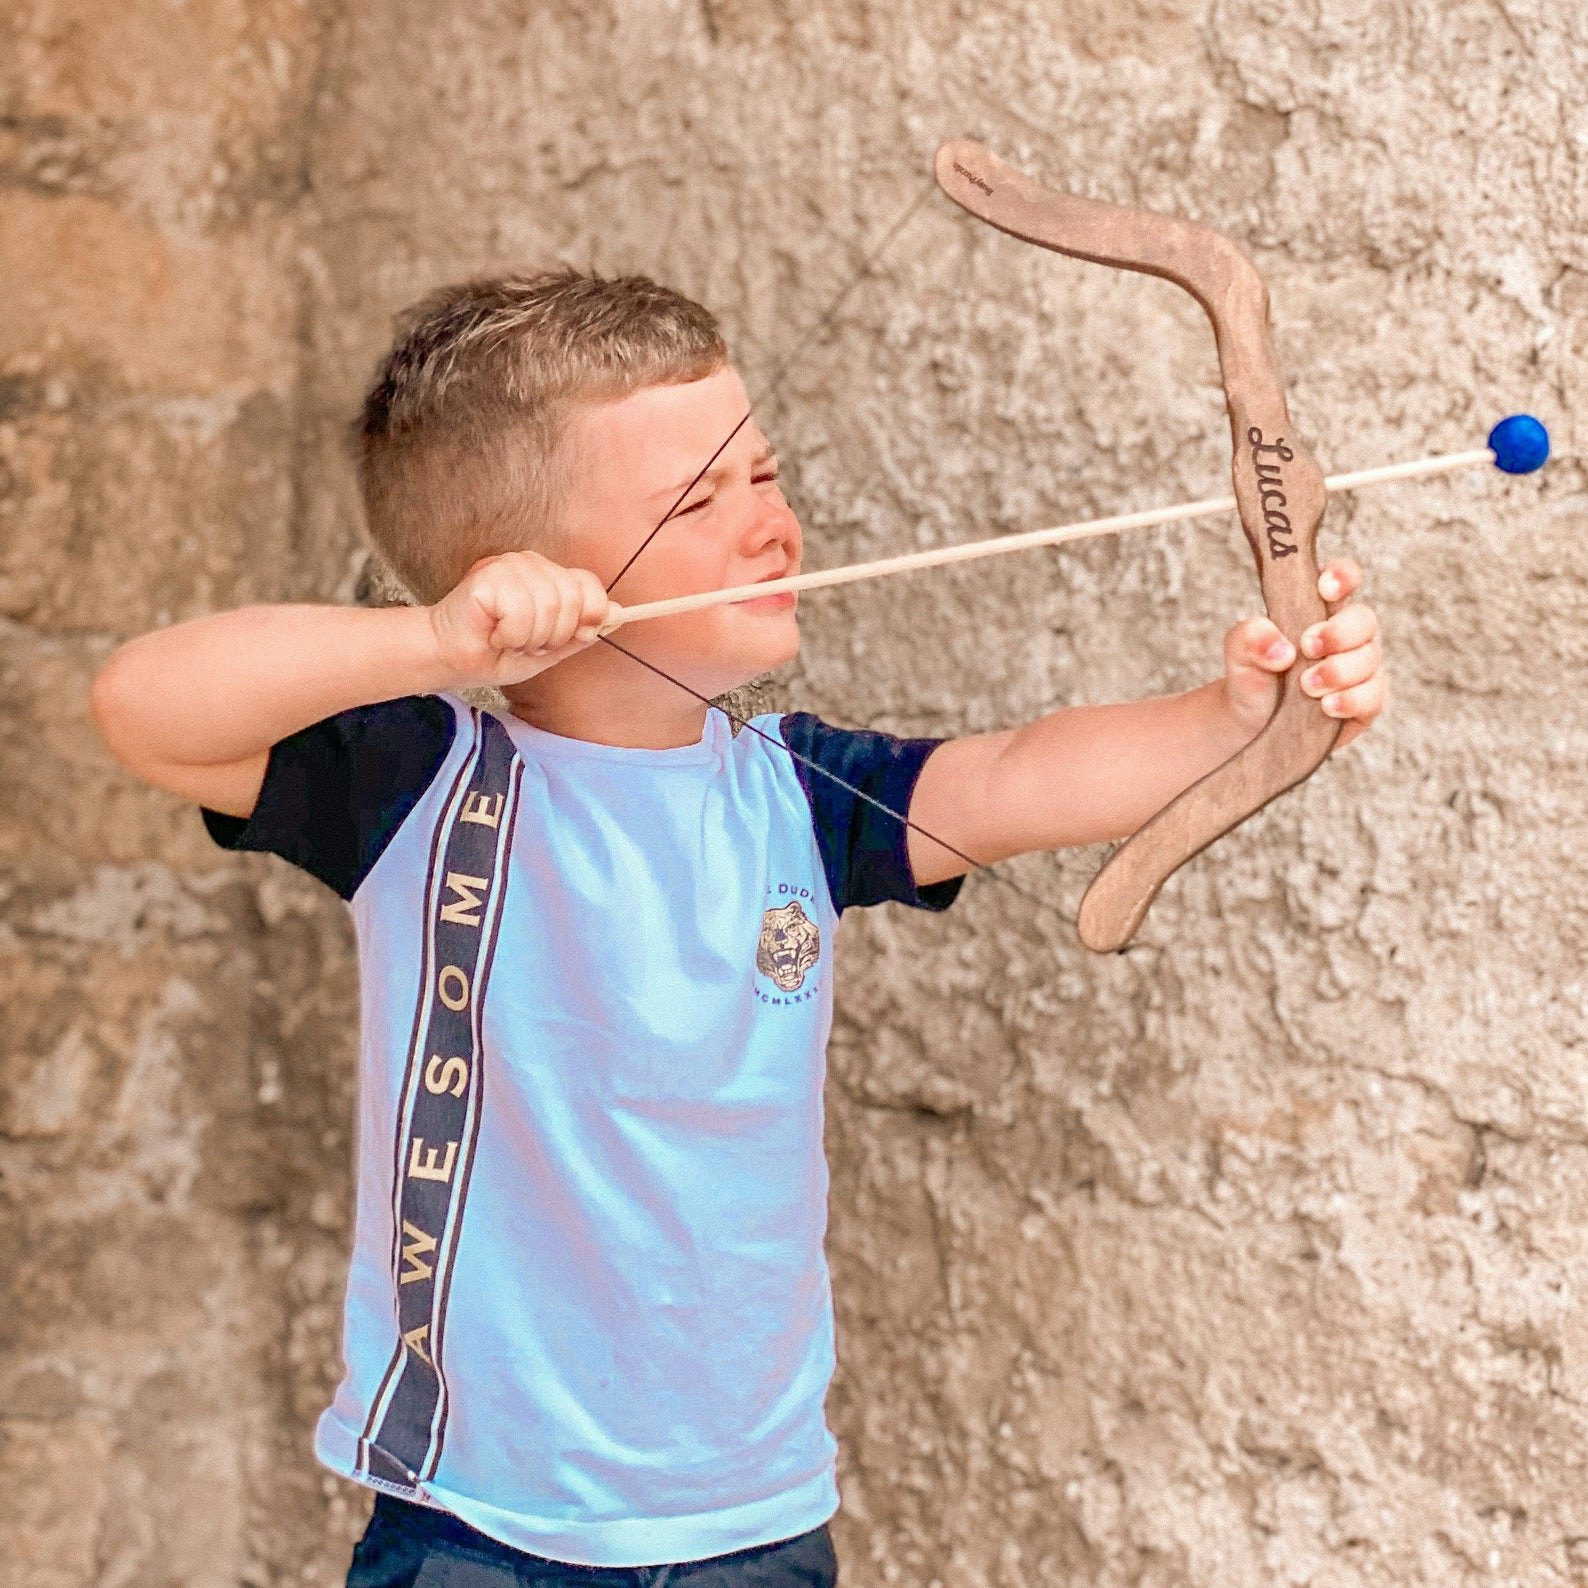 Kiddie Play Toy Archery Set for Kids with Target Bow and Arrow Kids Toys Age 5, 